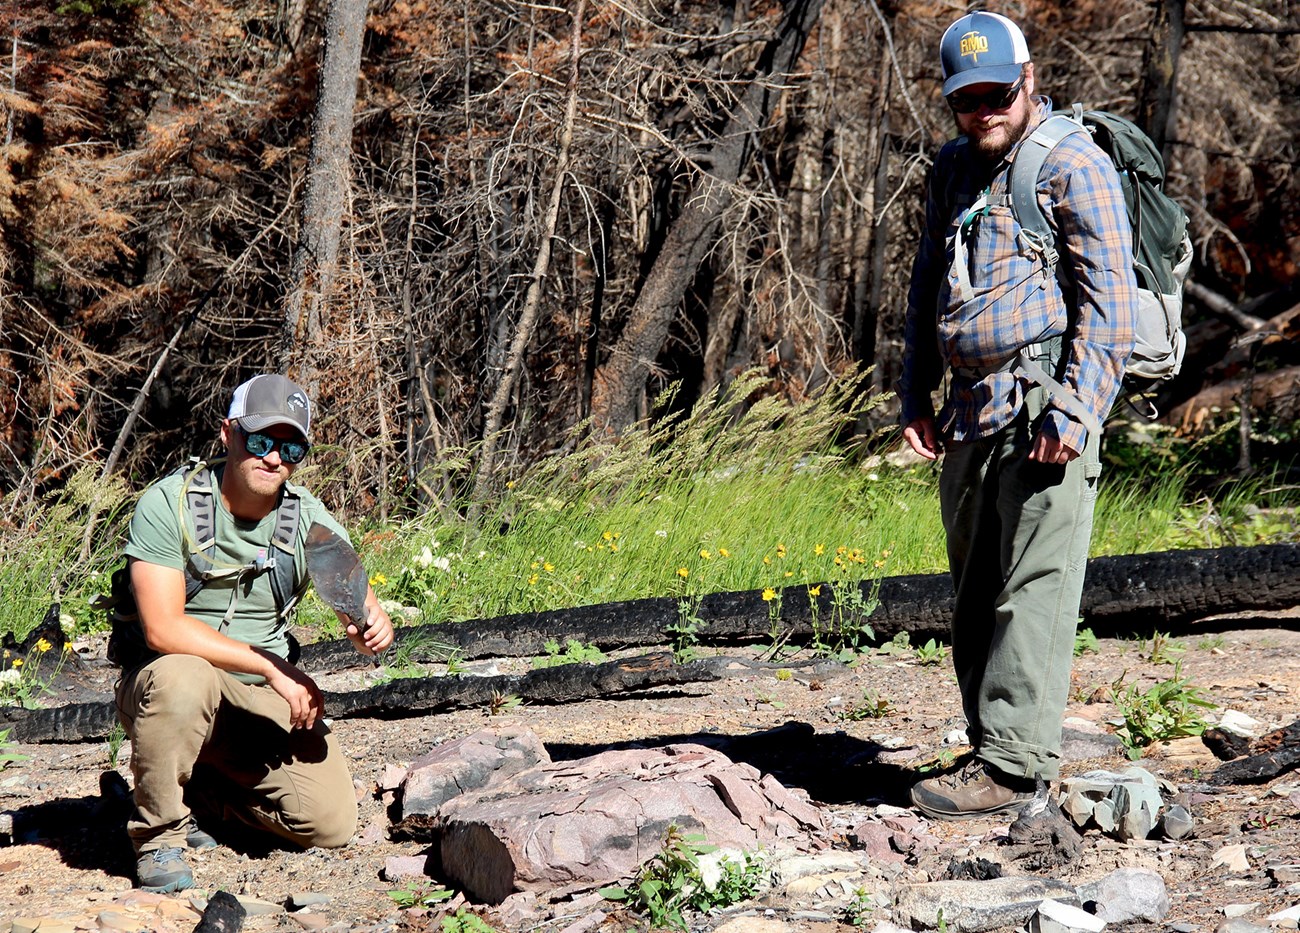 A crouched young man holds an artifact while another archeologist stands surveying site.